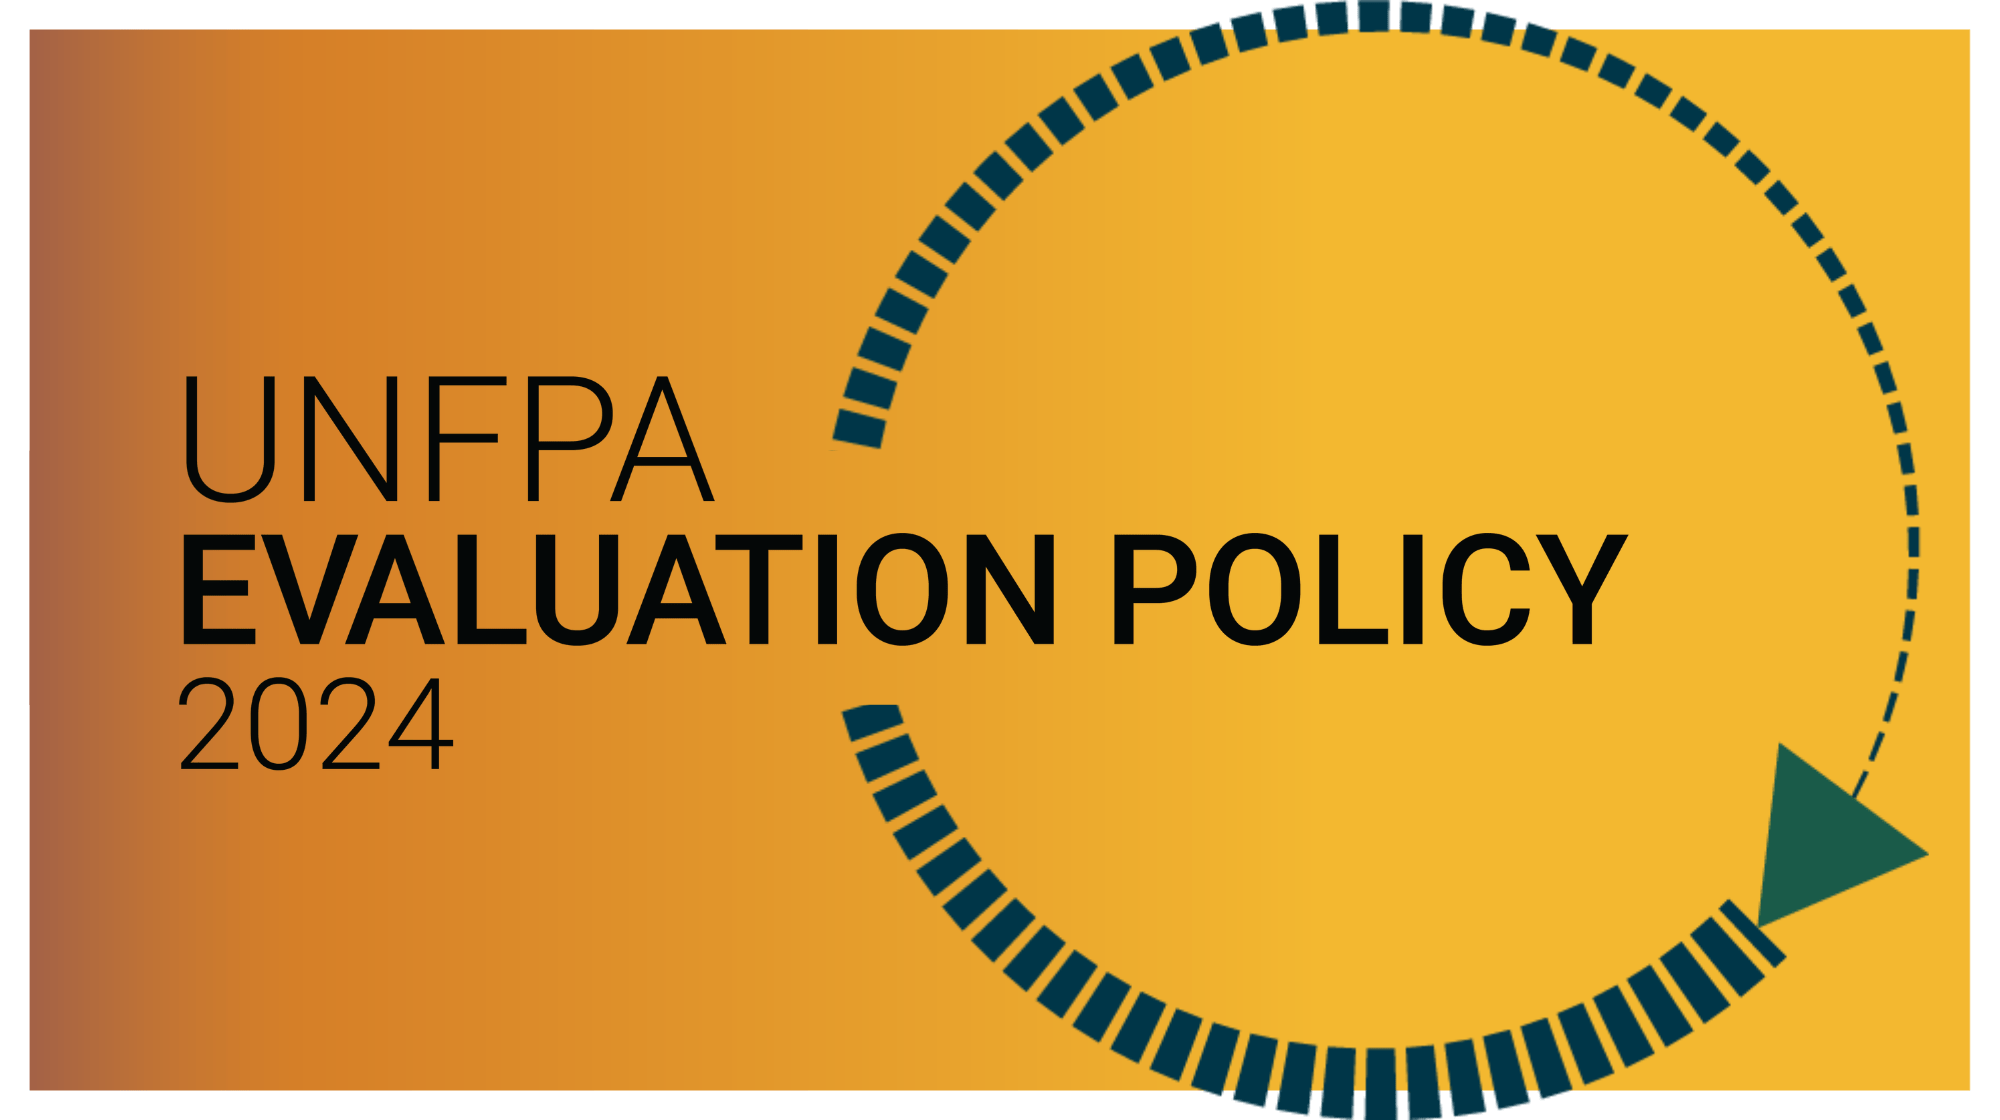 UNFPA Evaluation Policy 2024 